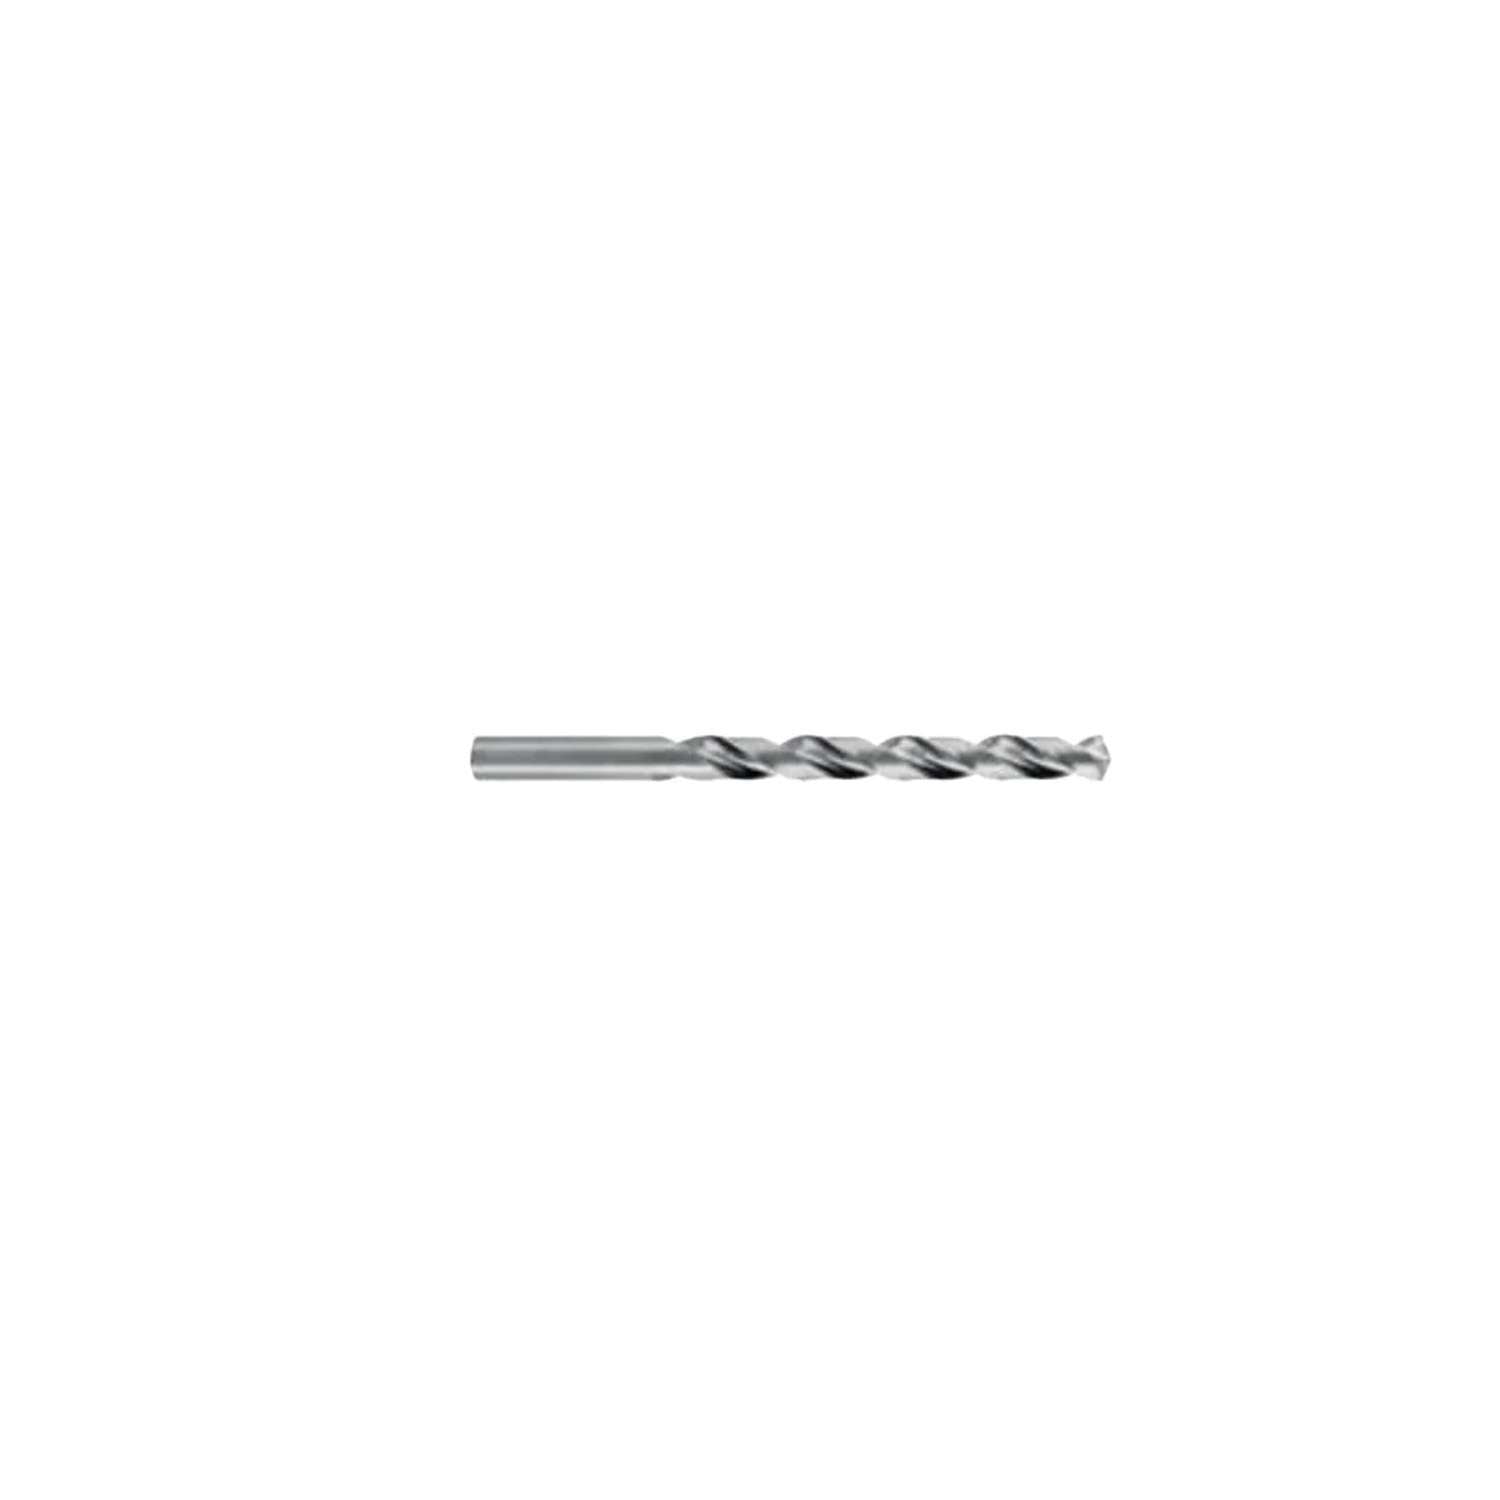 Helical tip in HSS-CO 8 DIN 388 5 - ILIX